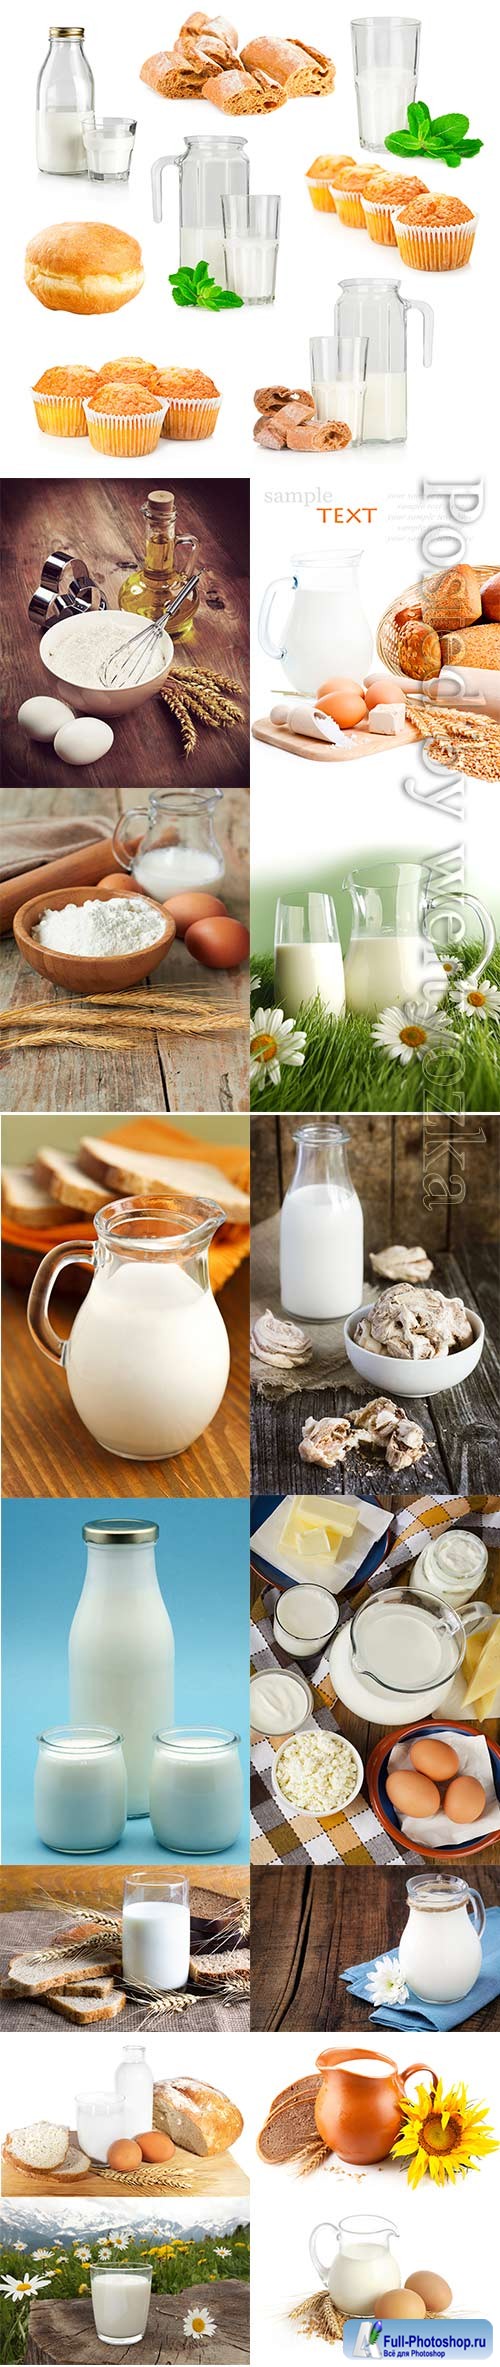 Milk and dairy products stock photo